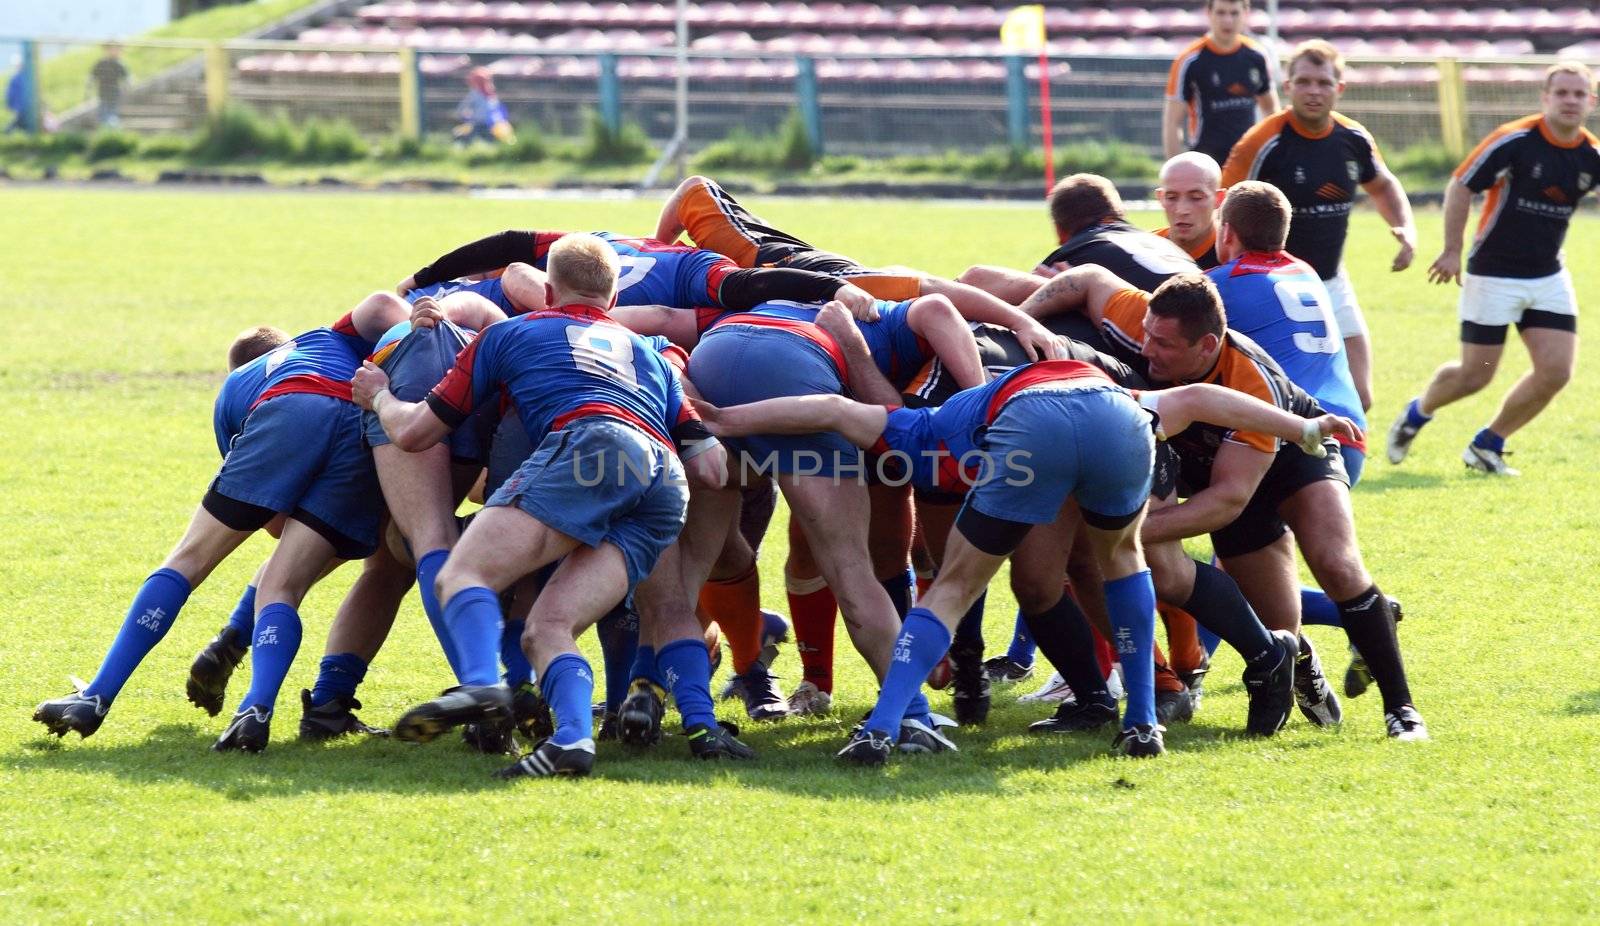 An action during a rugby match. a particular moment during an poland rugby match of 1st division